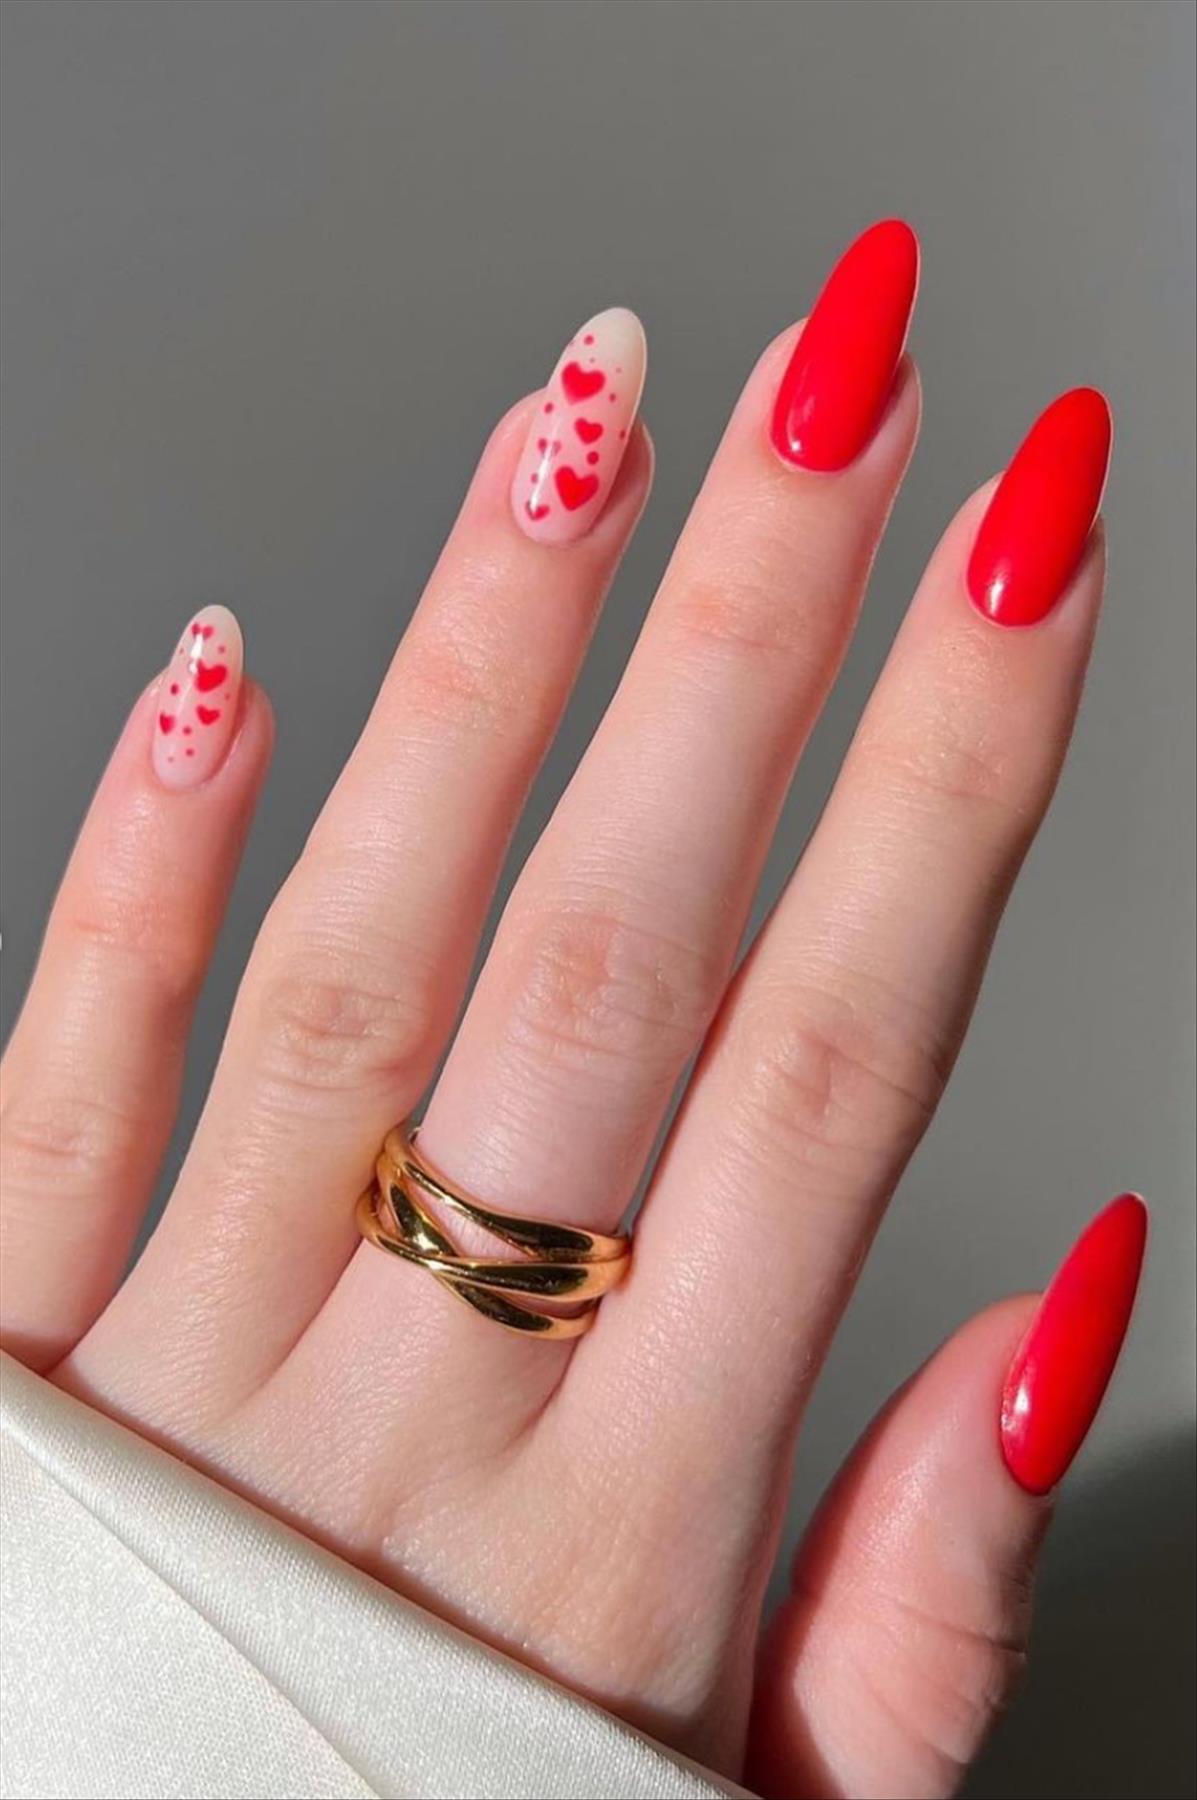 Pretty short valentine's day nails perfect for February